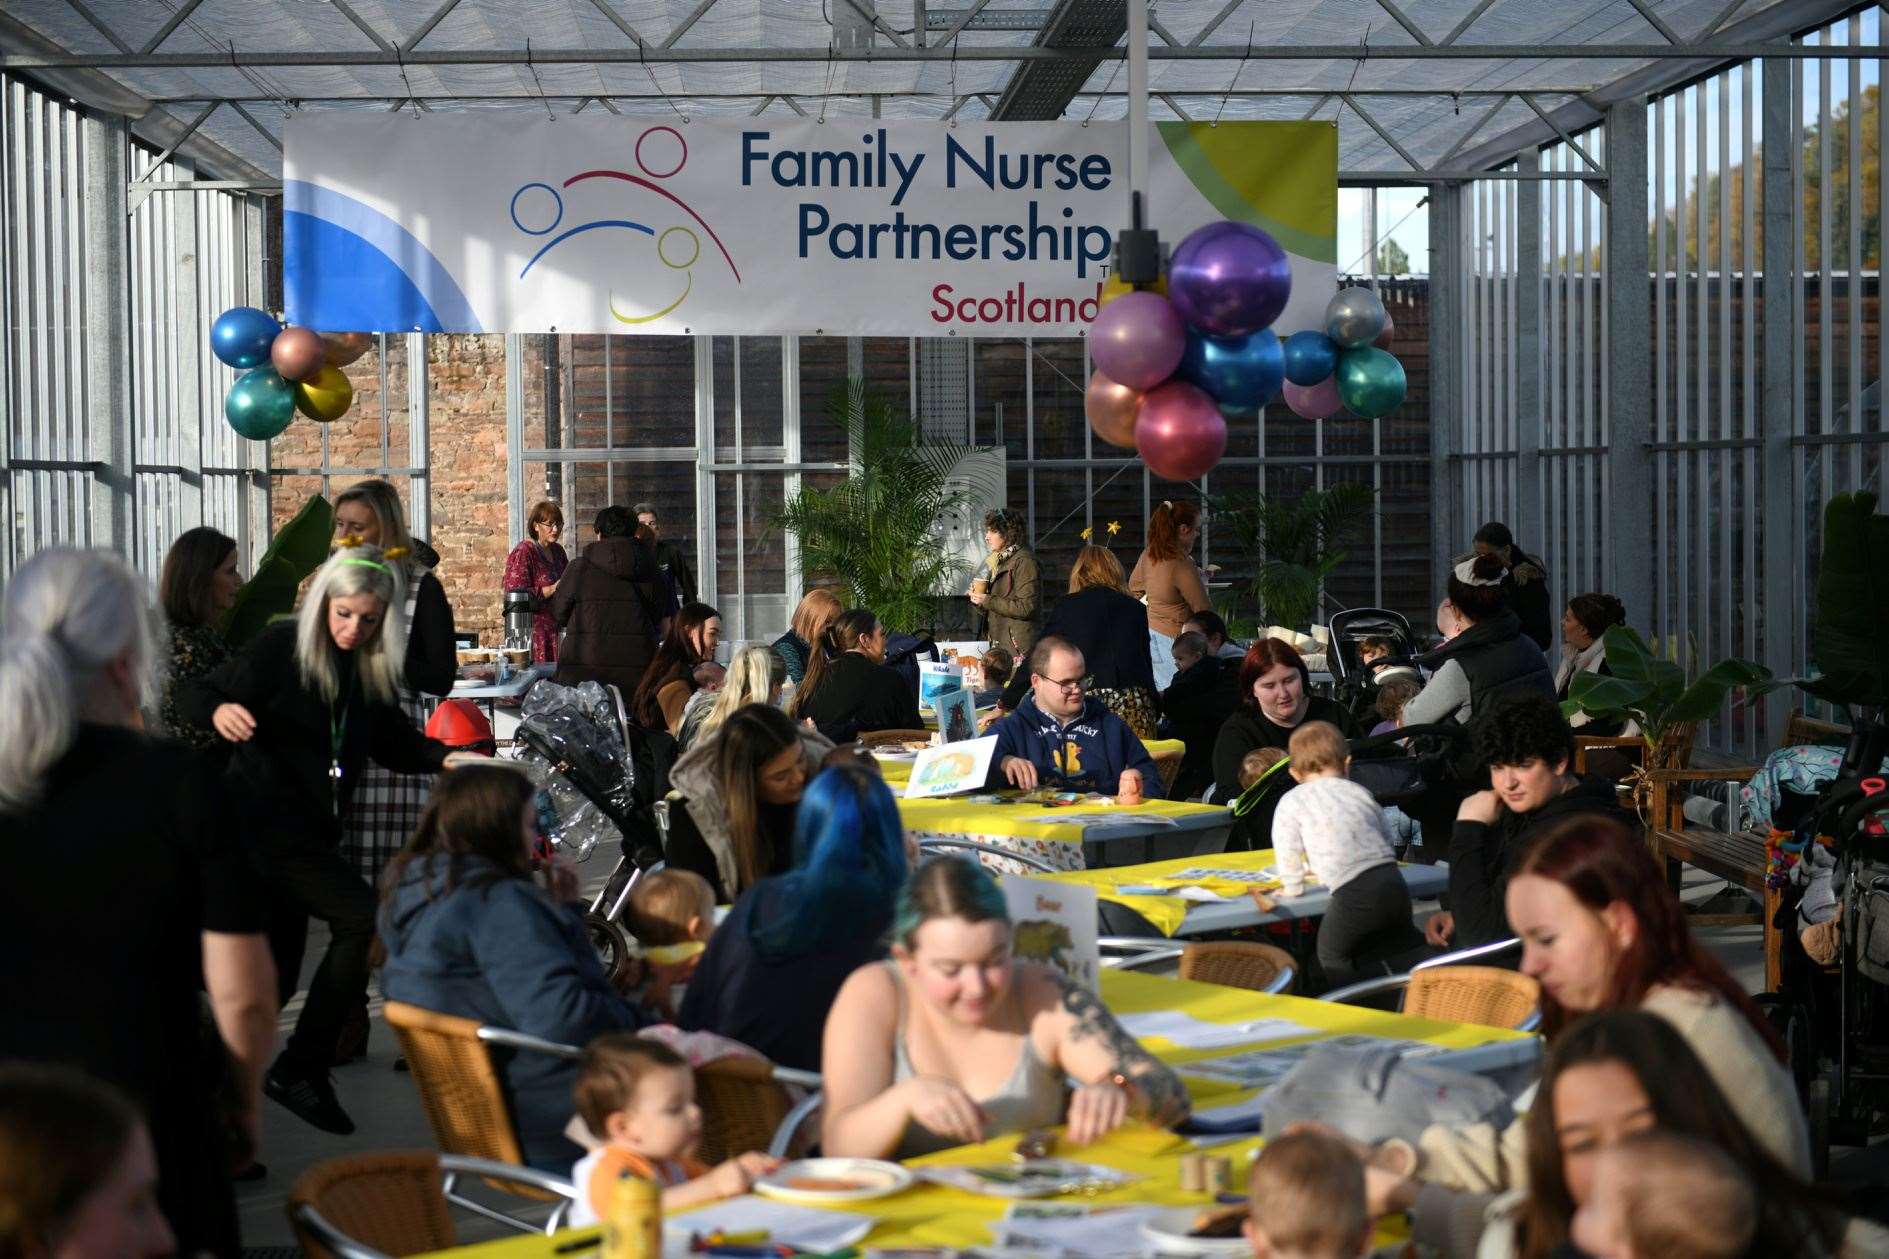 The Family Nurse Partnership celebrates 10 years at the Botanic Gardens in Inverness. Picture: James Mackenzie.